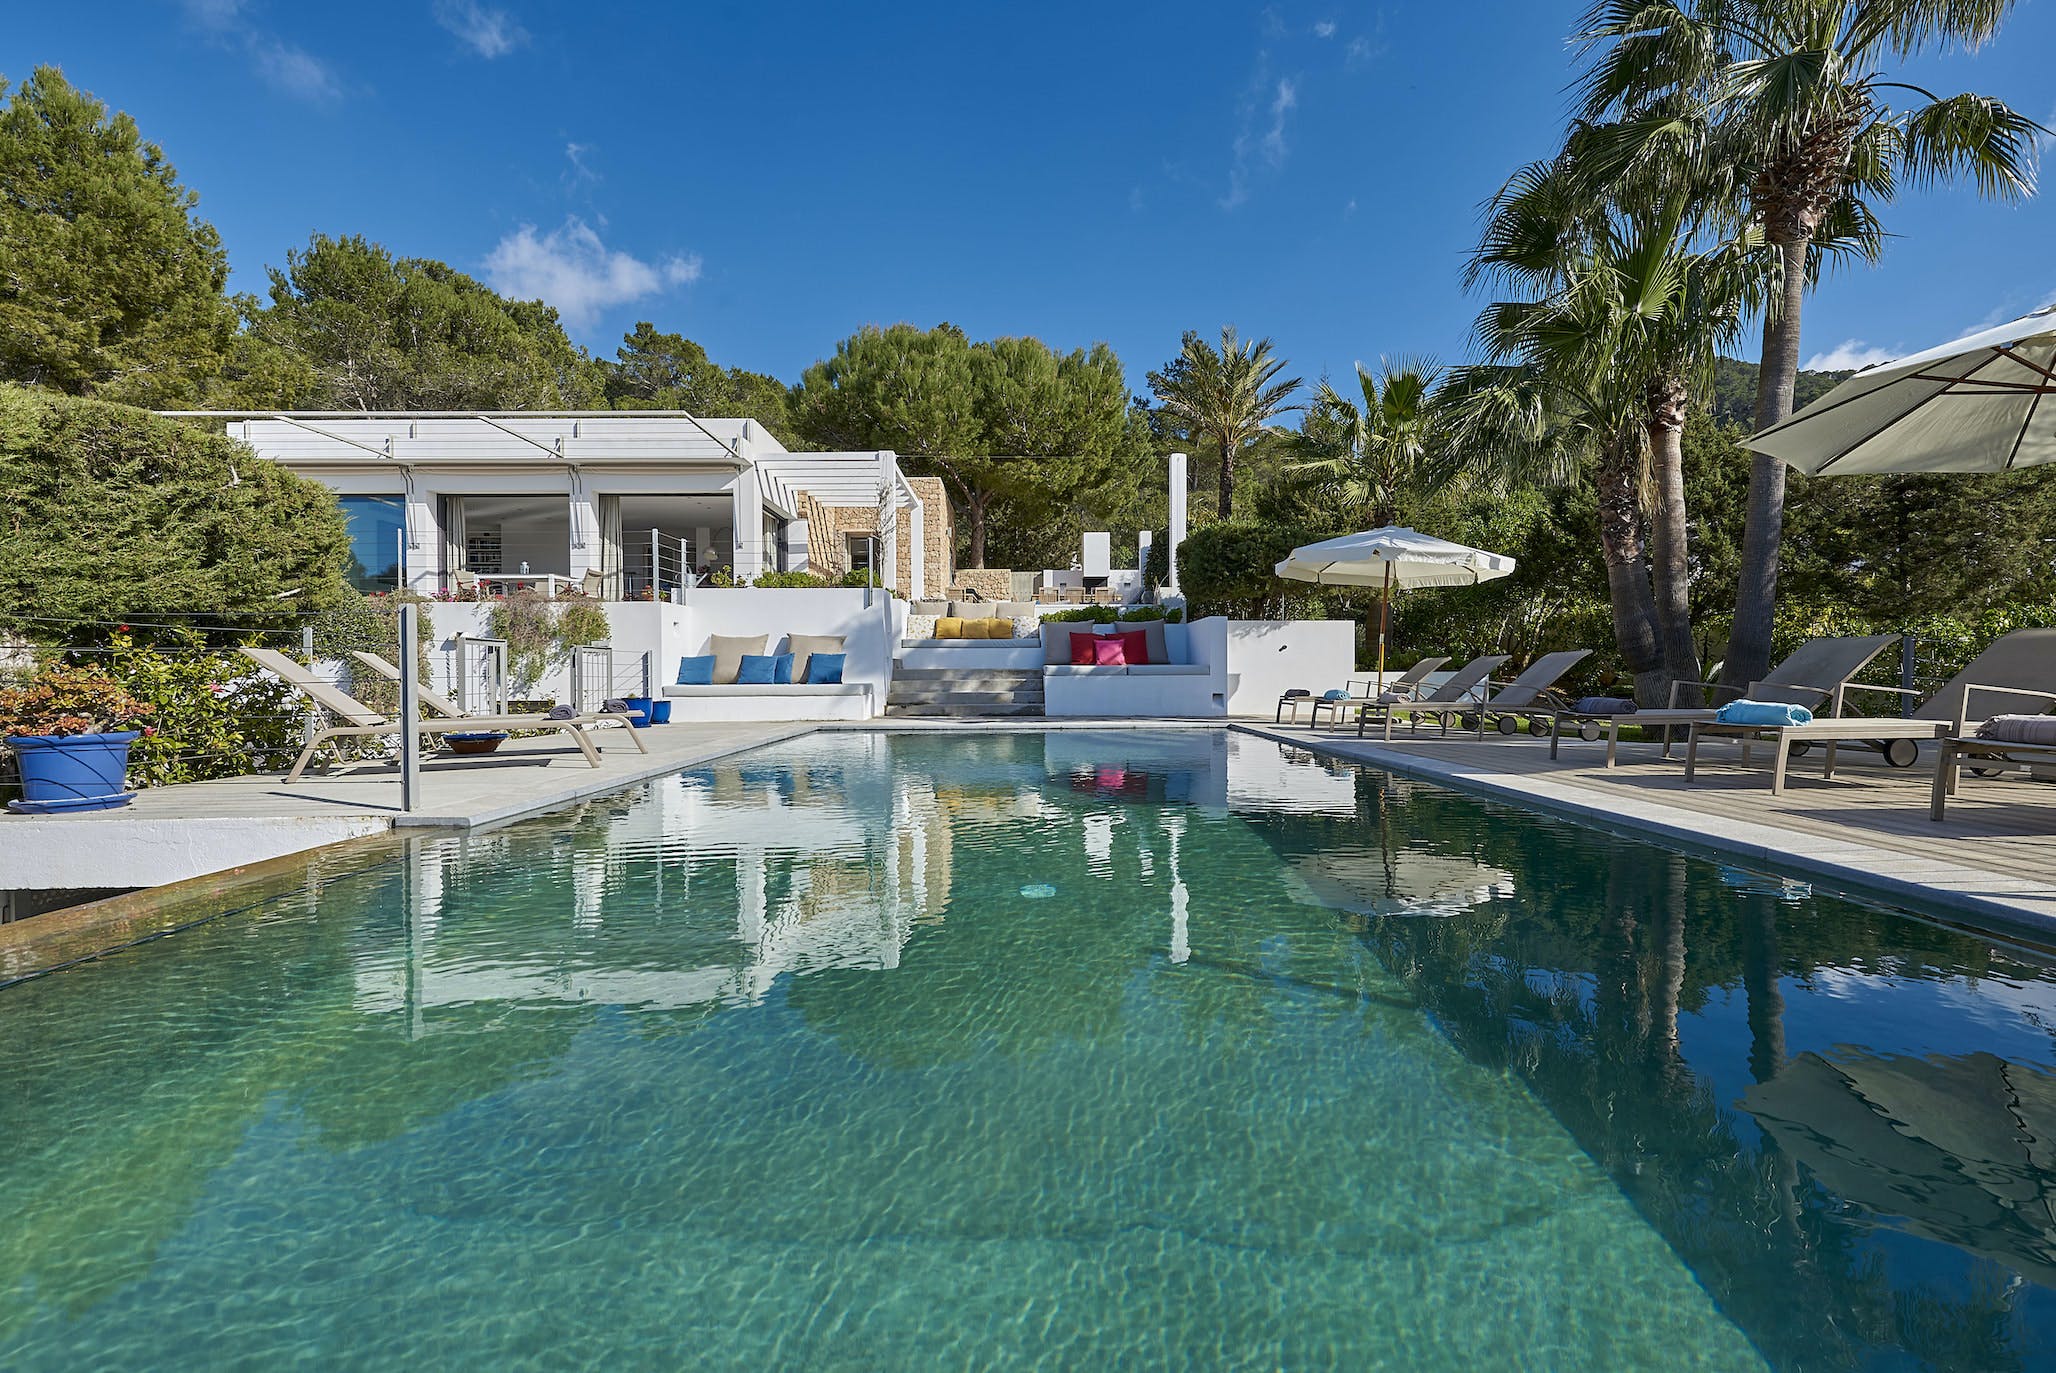 You are currently viewing Can Juana – ‘Beautiful Ibizan retreat close to the beaches of Ibiza’s west coast.’